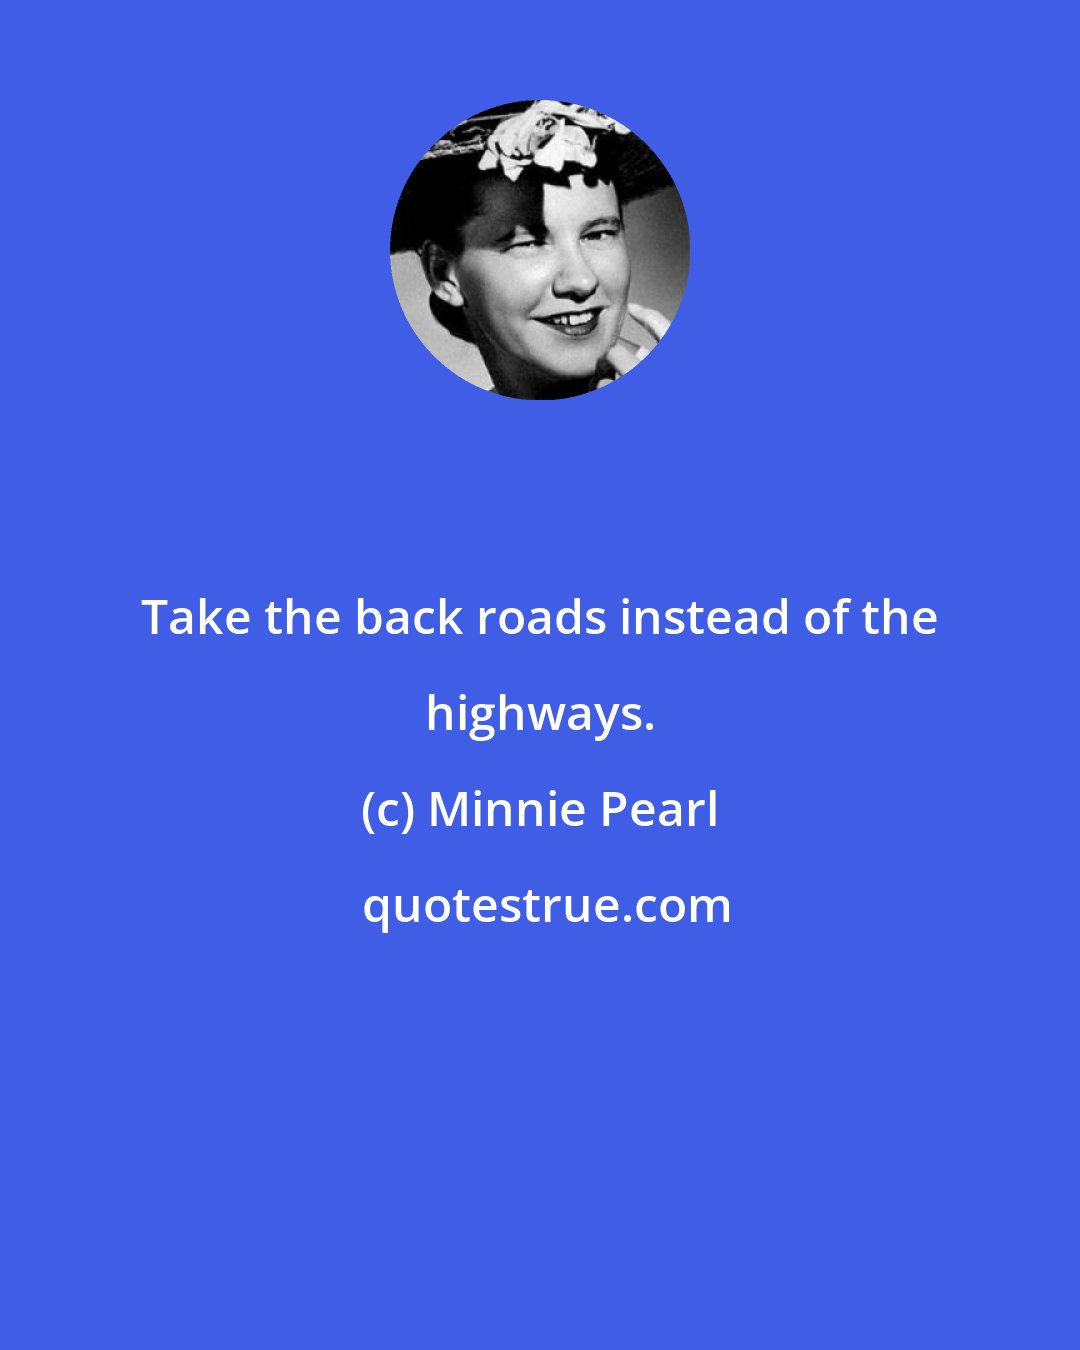 Minnie Pearl: Take the back roads instead of the highways.